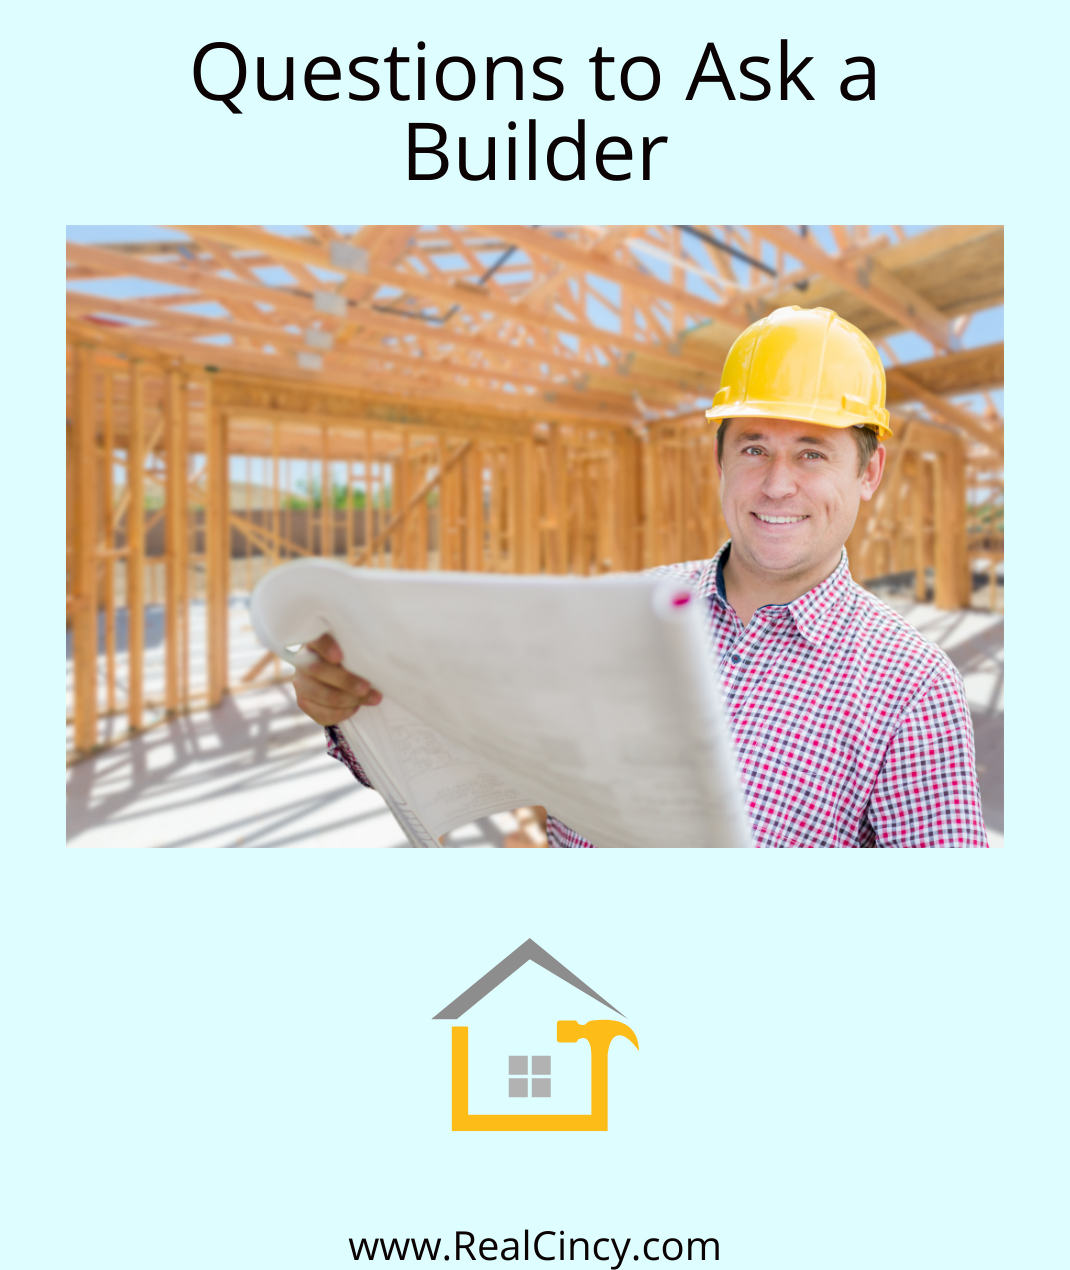 Questions to Ask a Builder